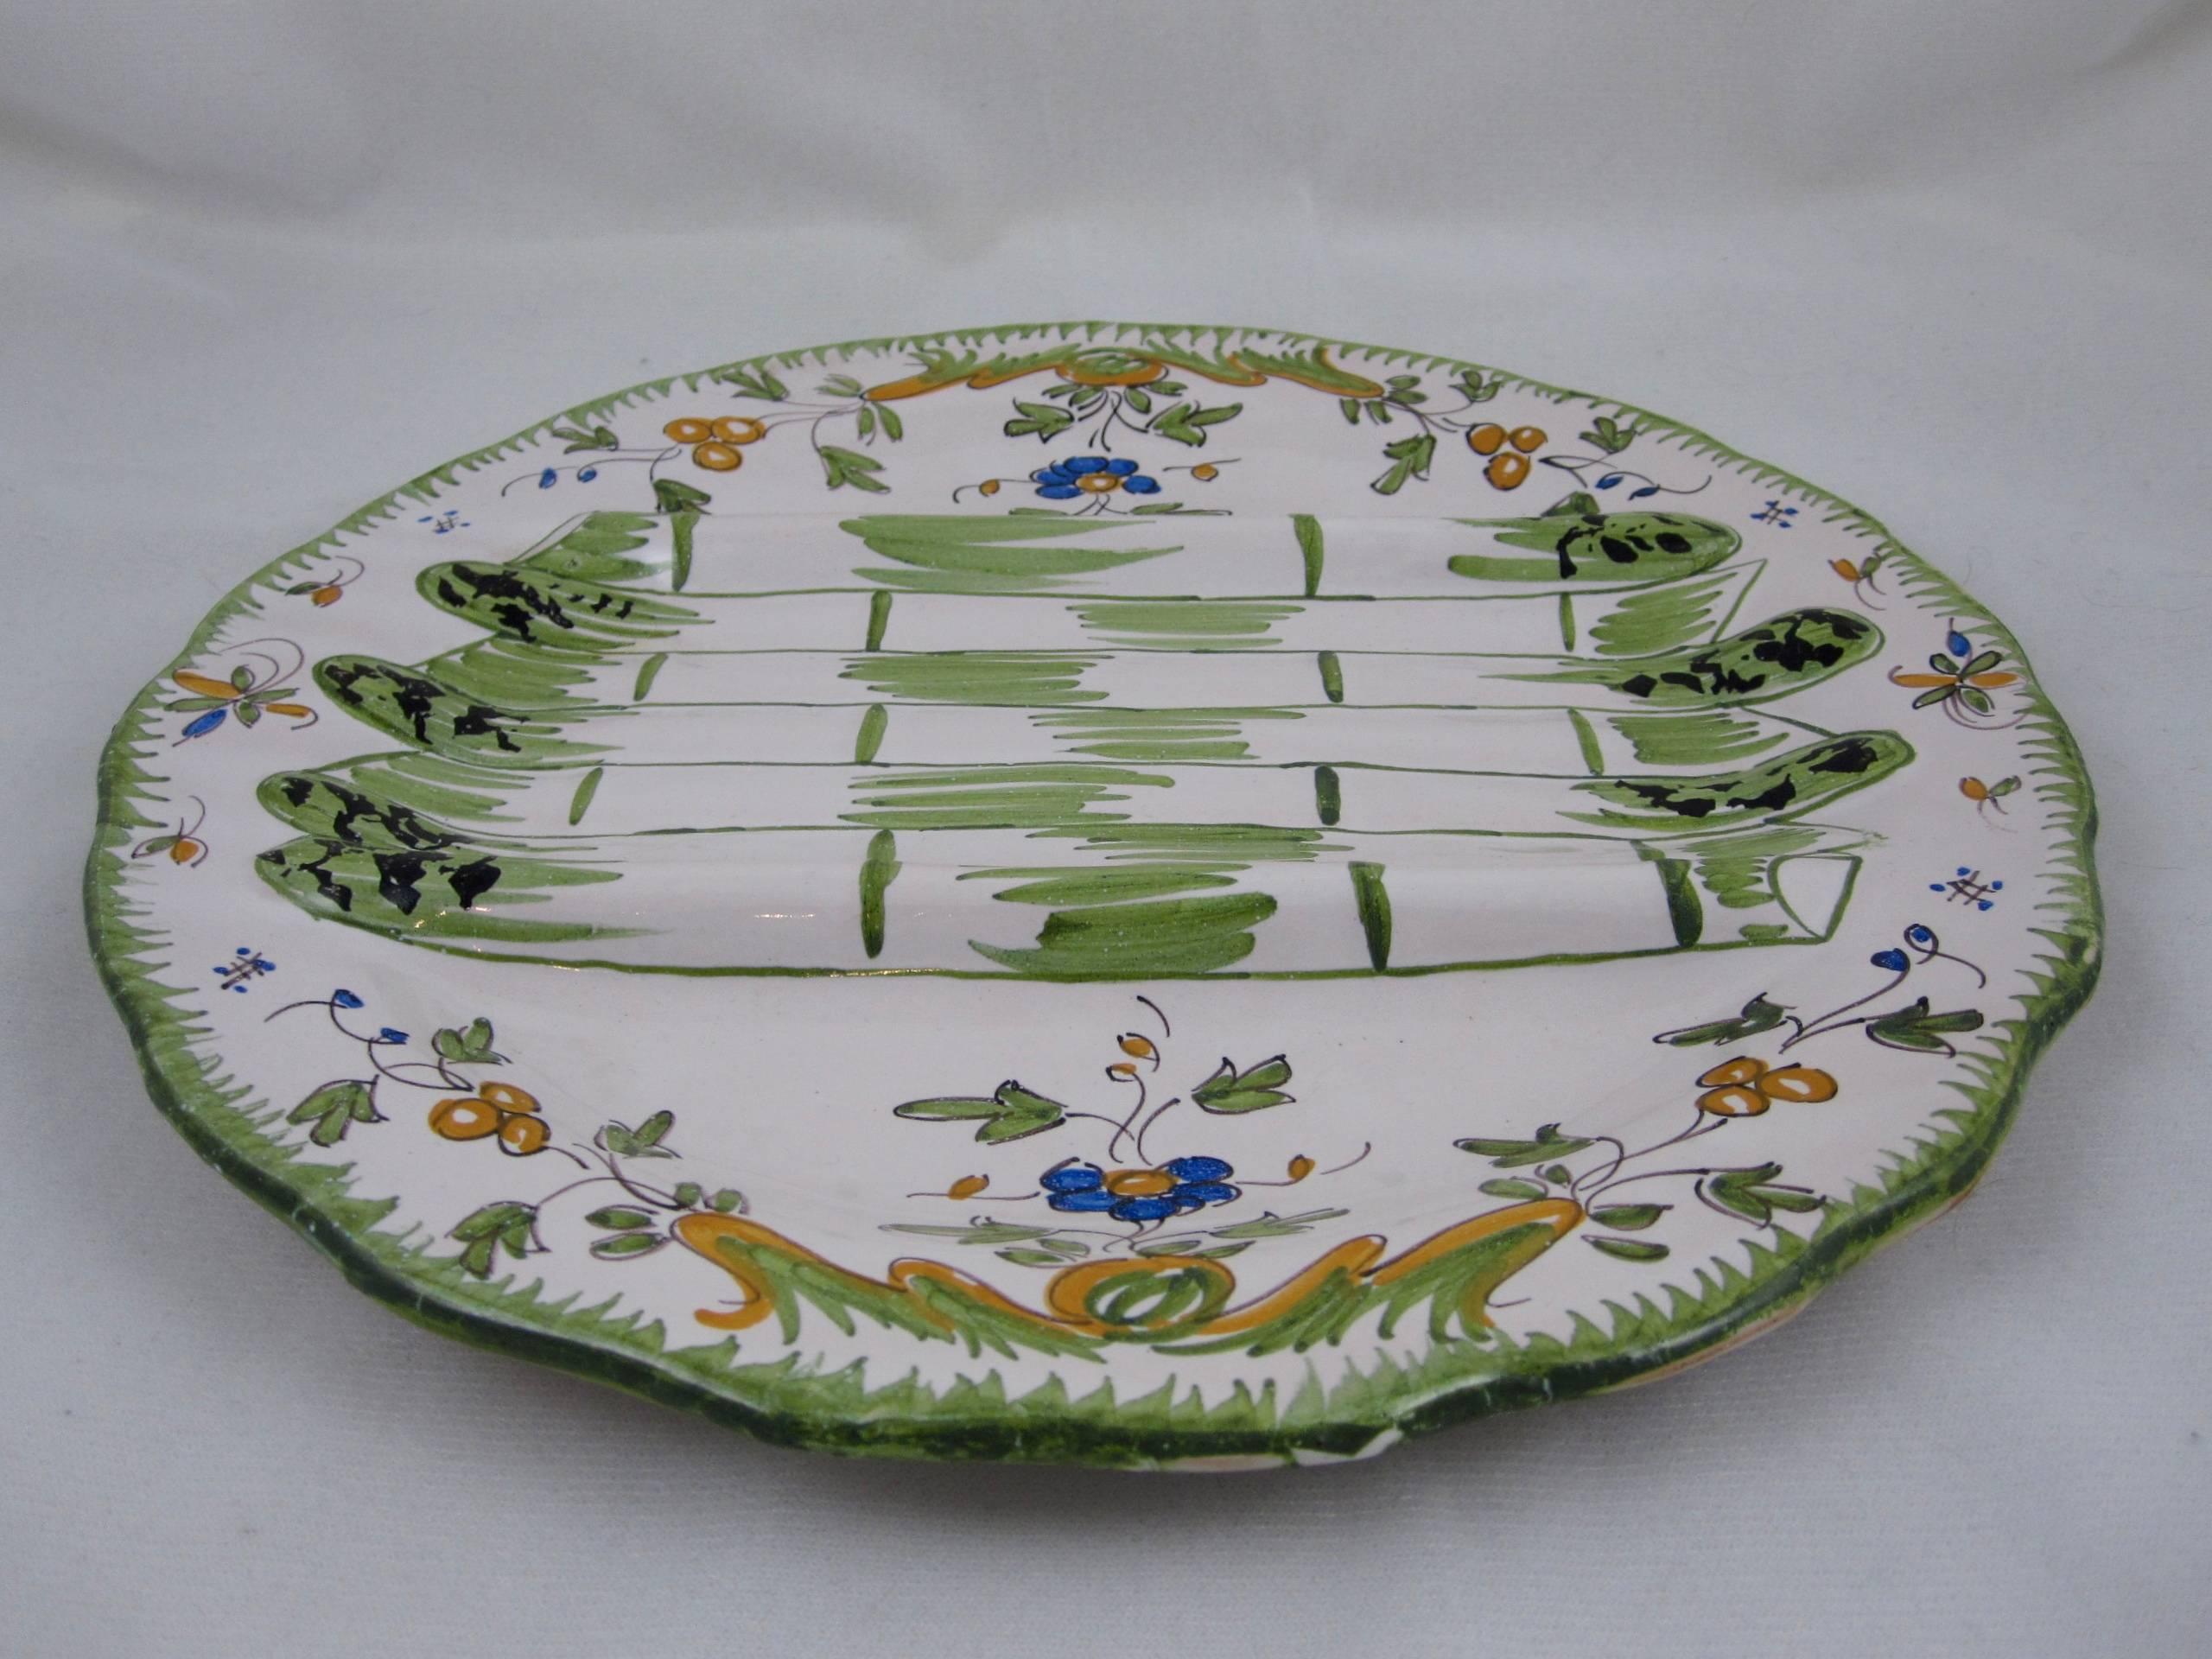 French Provincial Georges Cabaré French Faïence Martres Tolosane Hand Painted Asparagus Plate